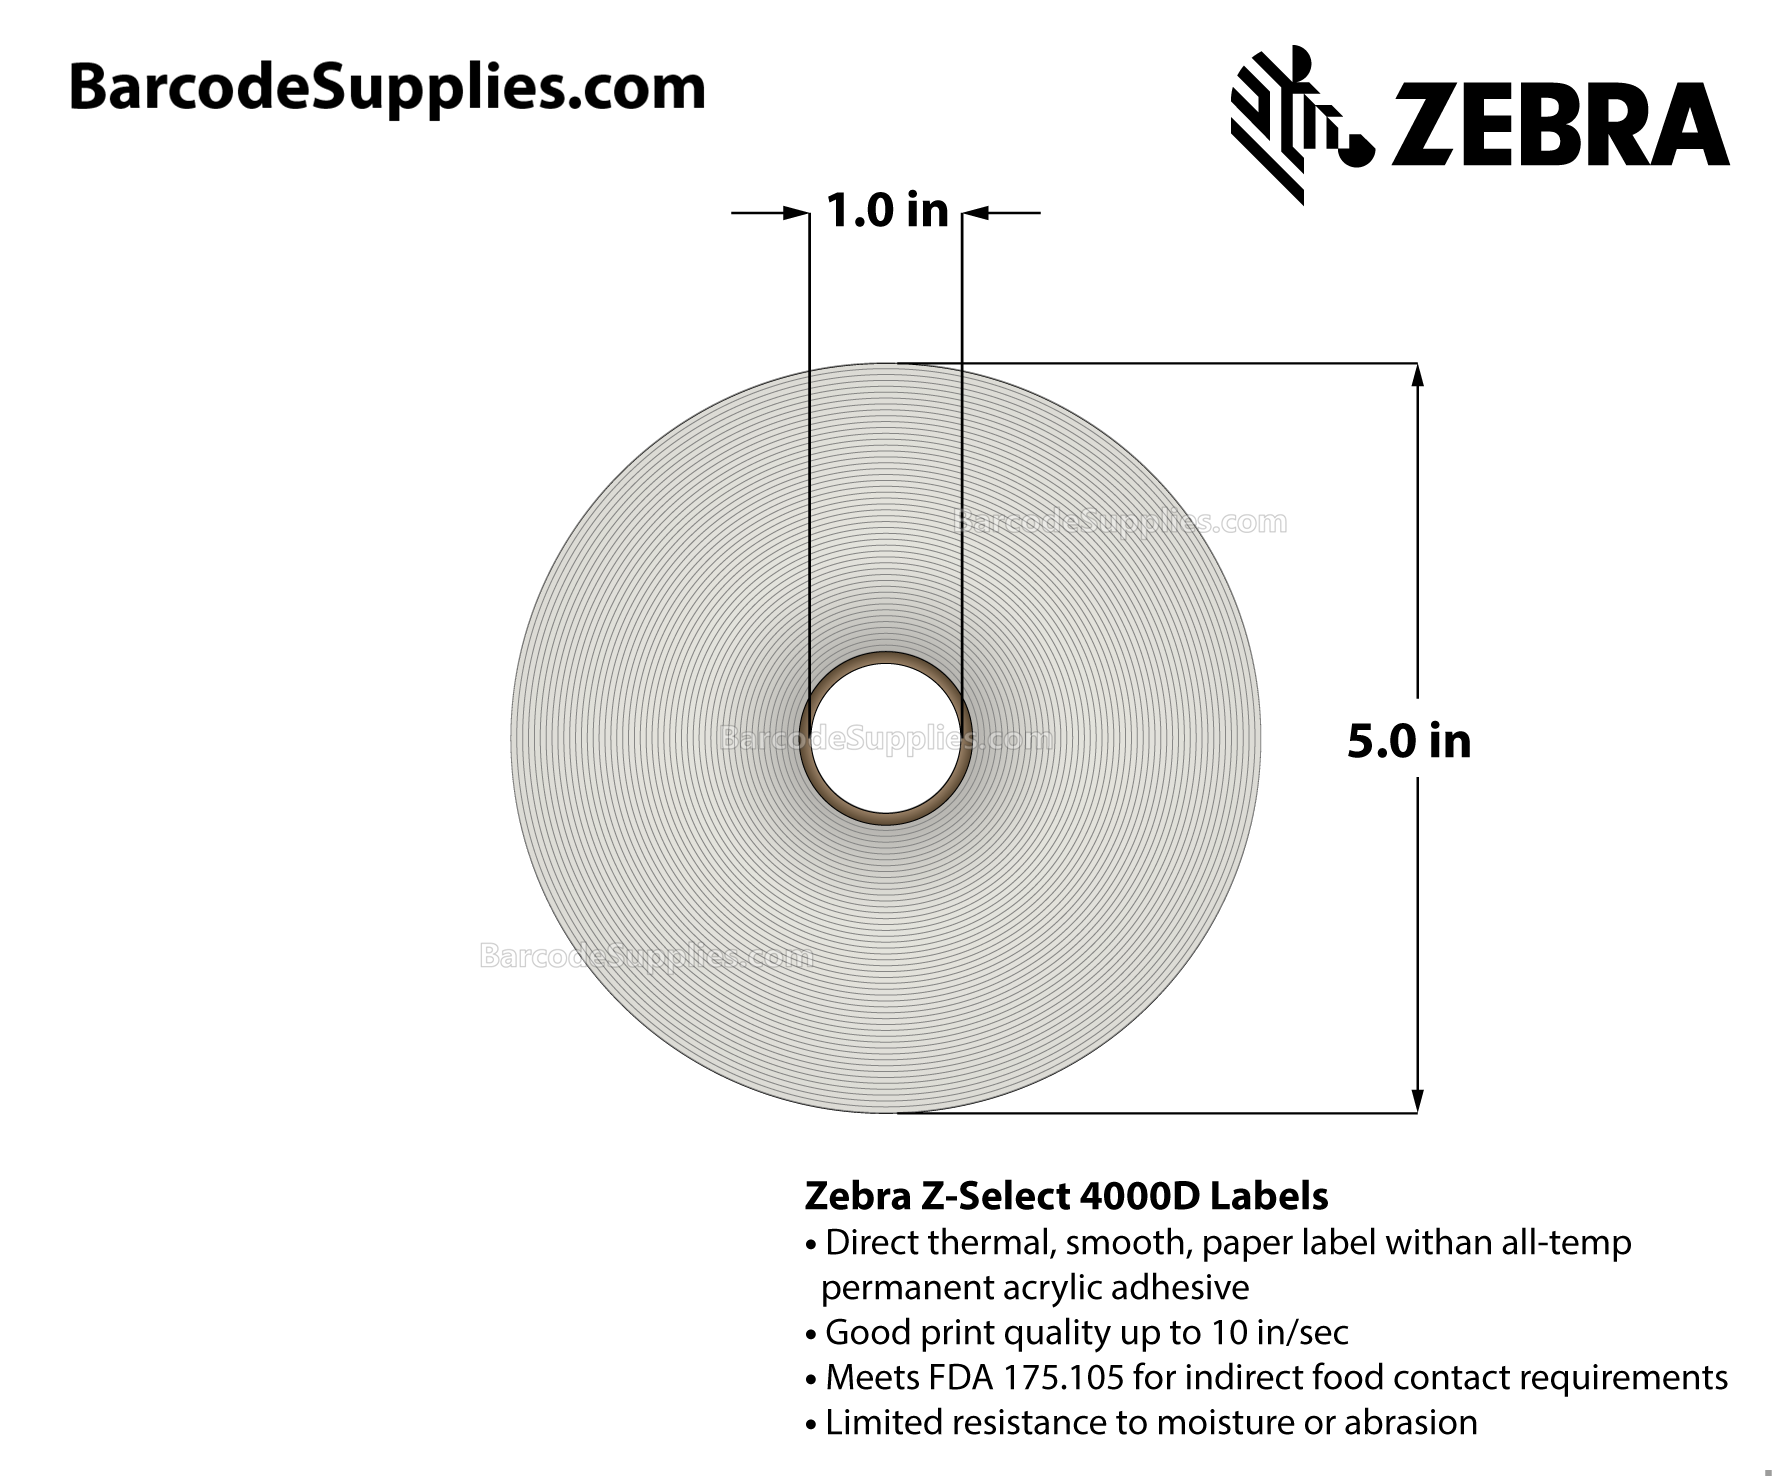 4 x 4 Direct Thermal White Z-Select 4000D Labels With All-Temp Adhesive - Perforated - 700 Labels Per Roll - Carton Of 12 Rolls - 8400 Labels Total - MPN: 10015345